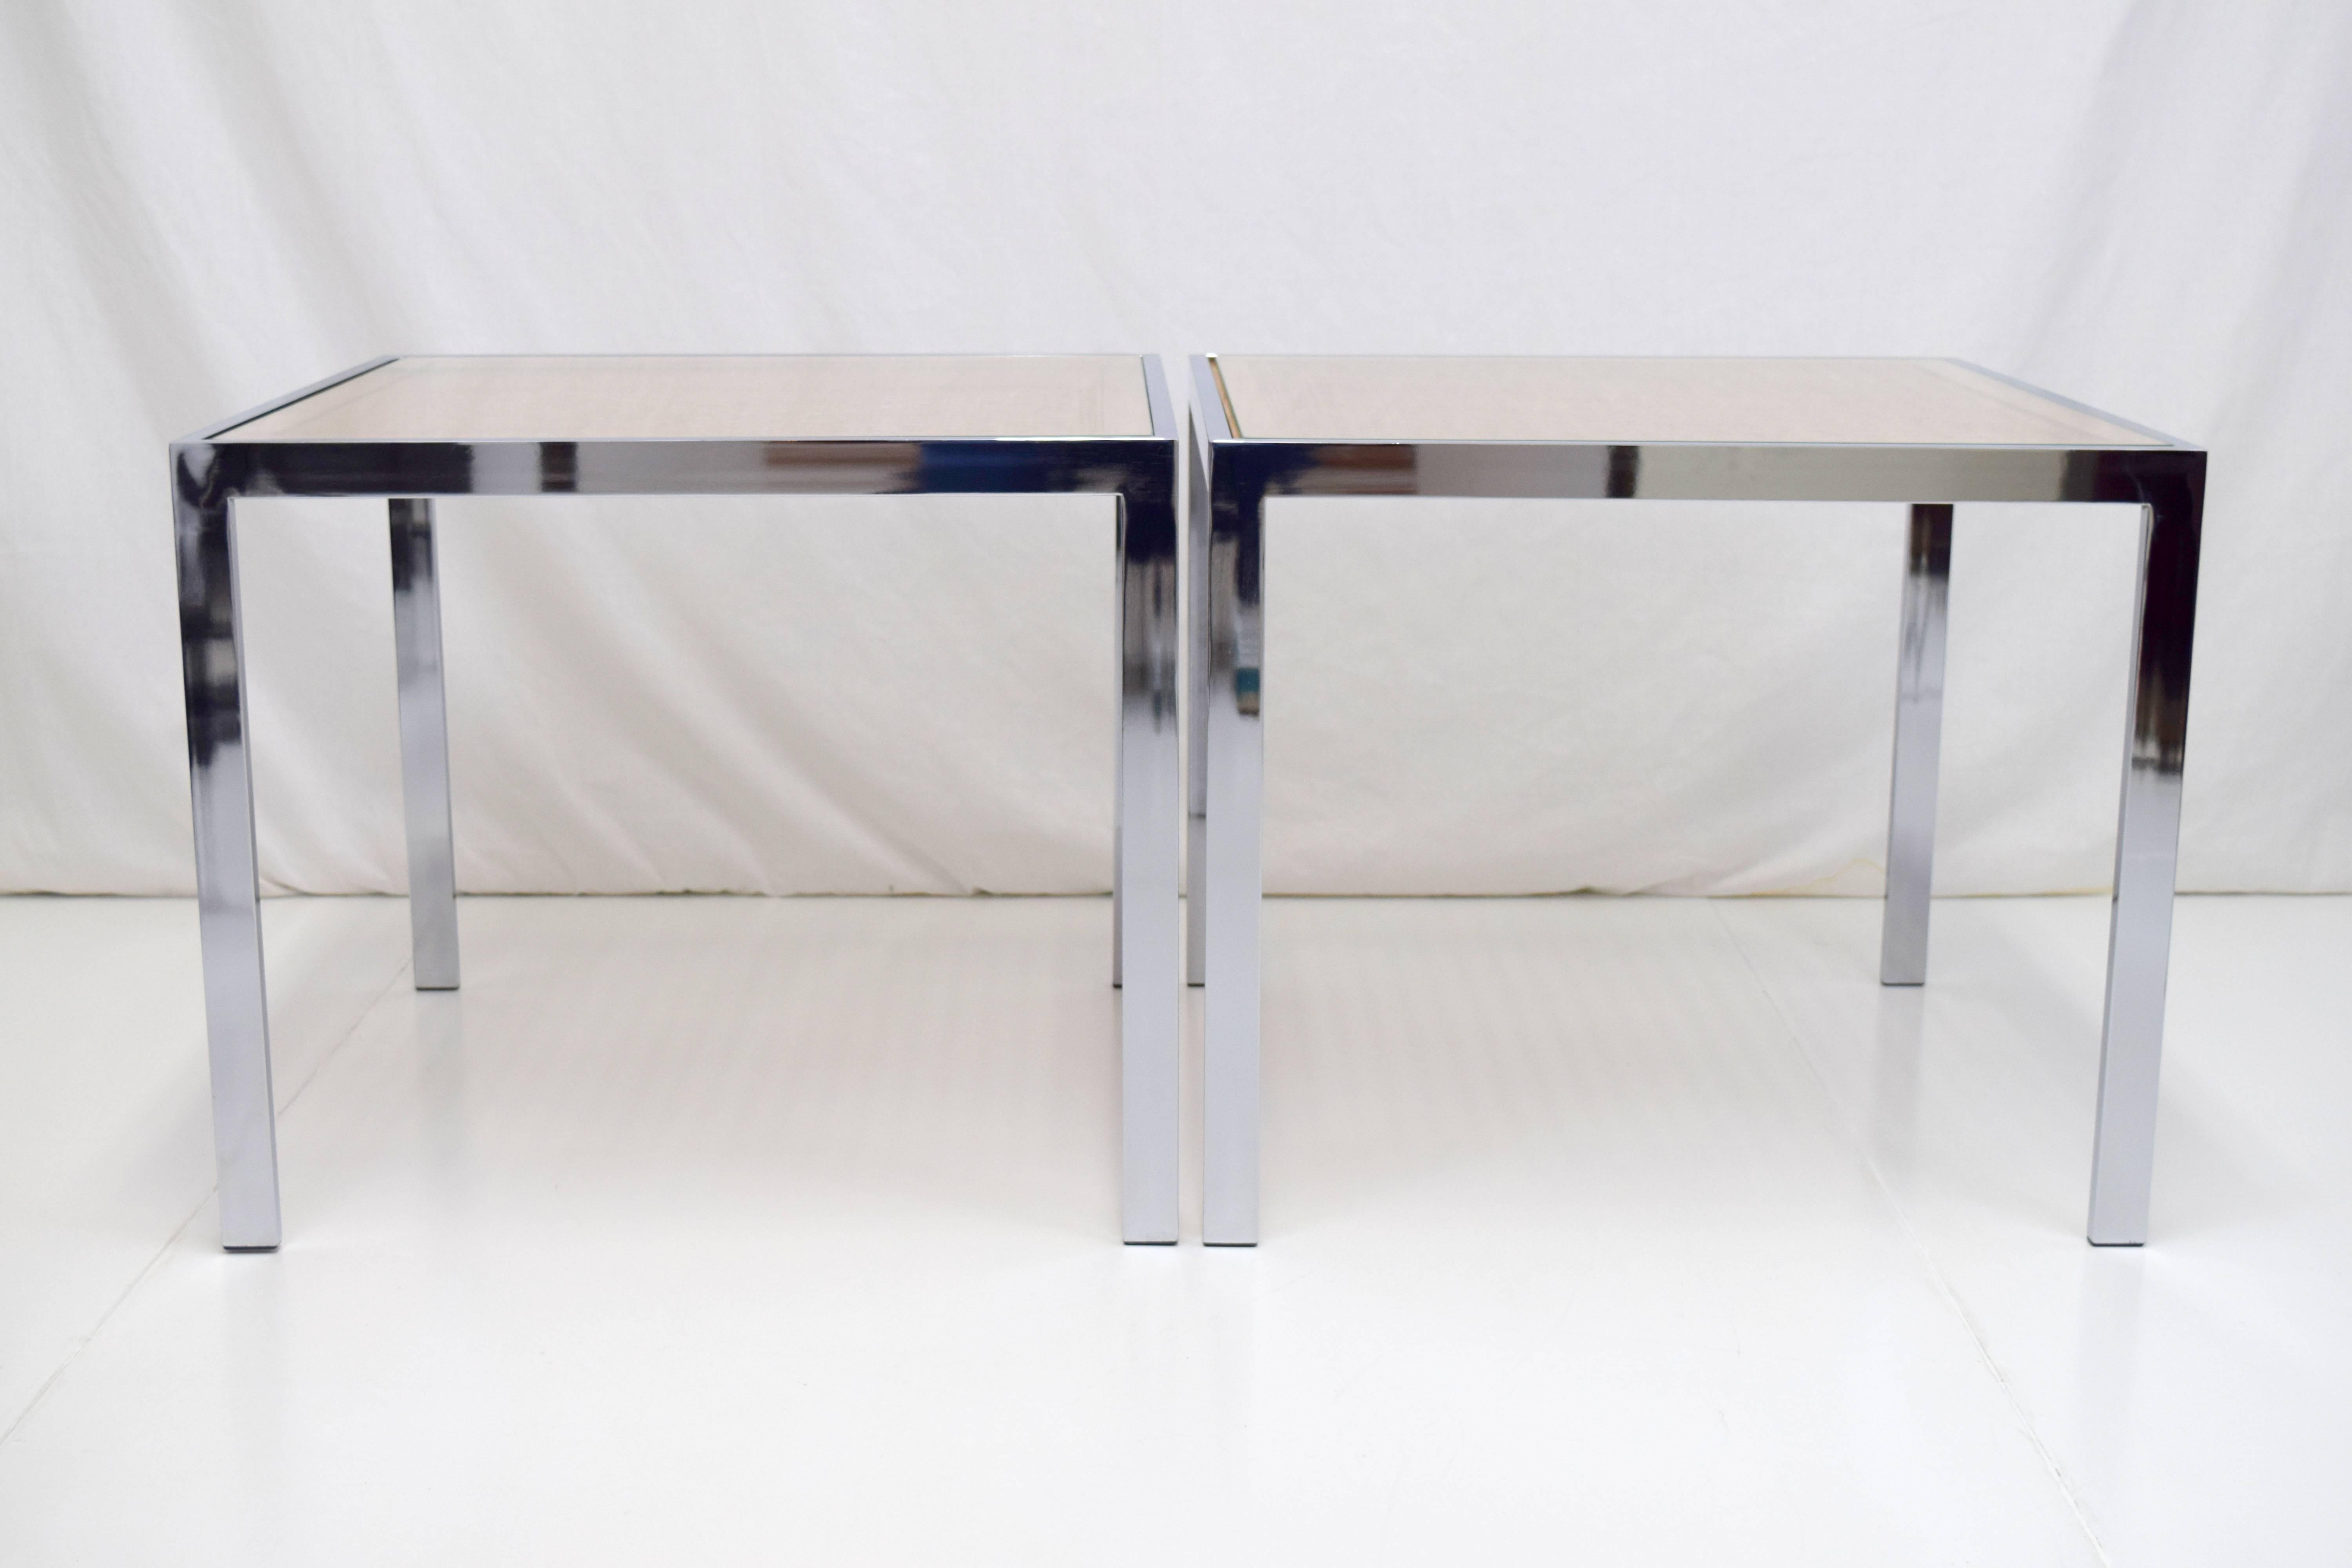 Milo Baughman cane and chrome end tables, pair. Glass over woven cane and wood tops with polished chrome frame finished in plastic caps. Square dimensions allows to be oriented with thin or thick profile Silhouette.